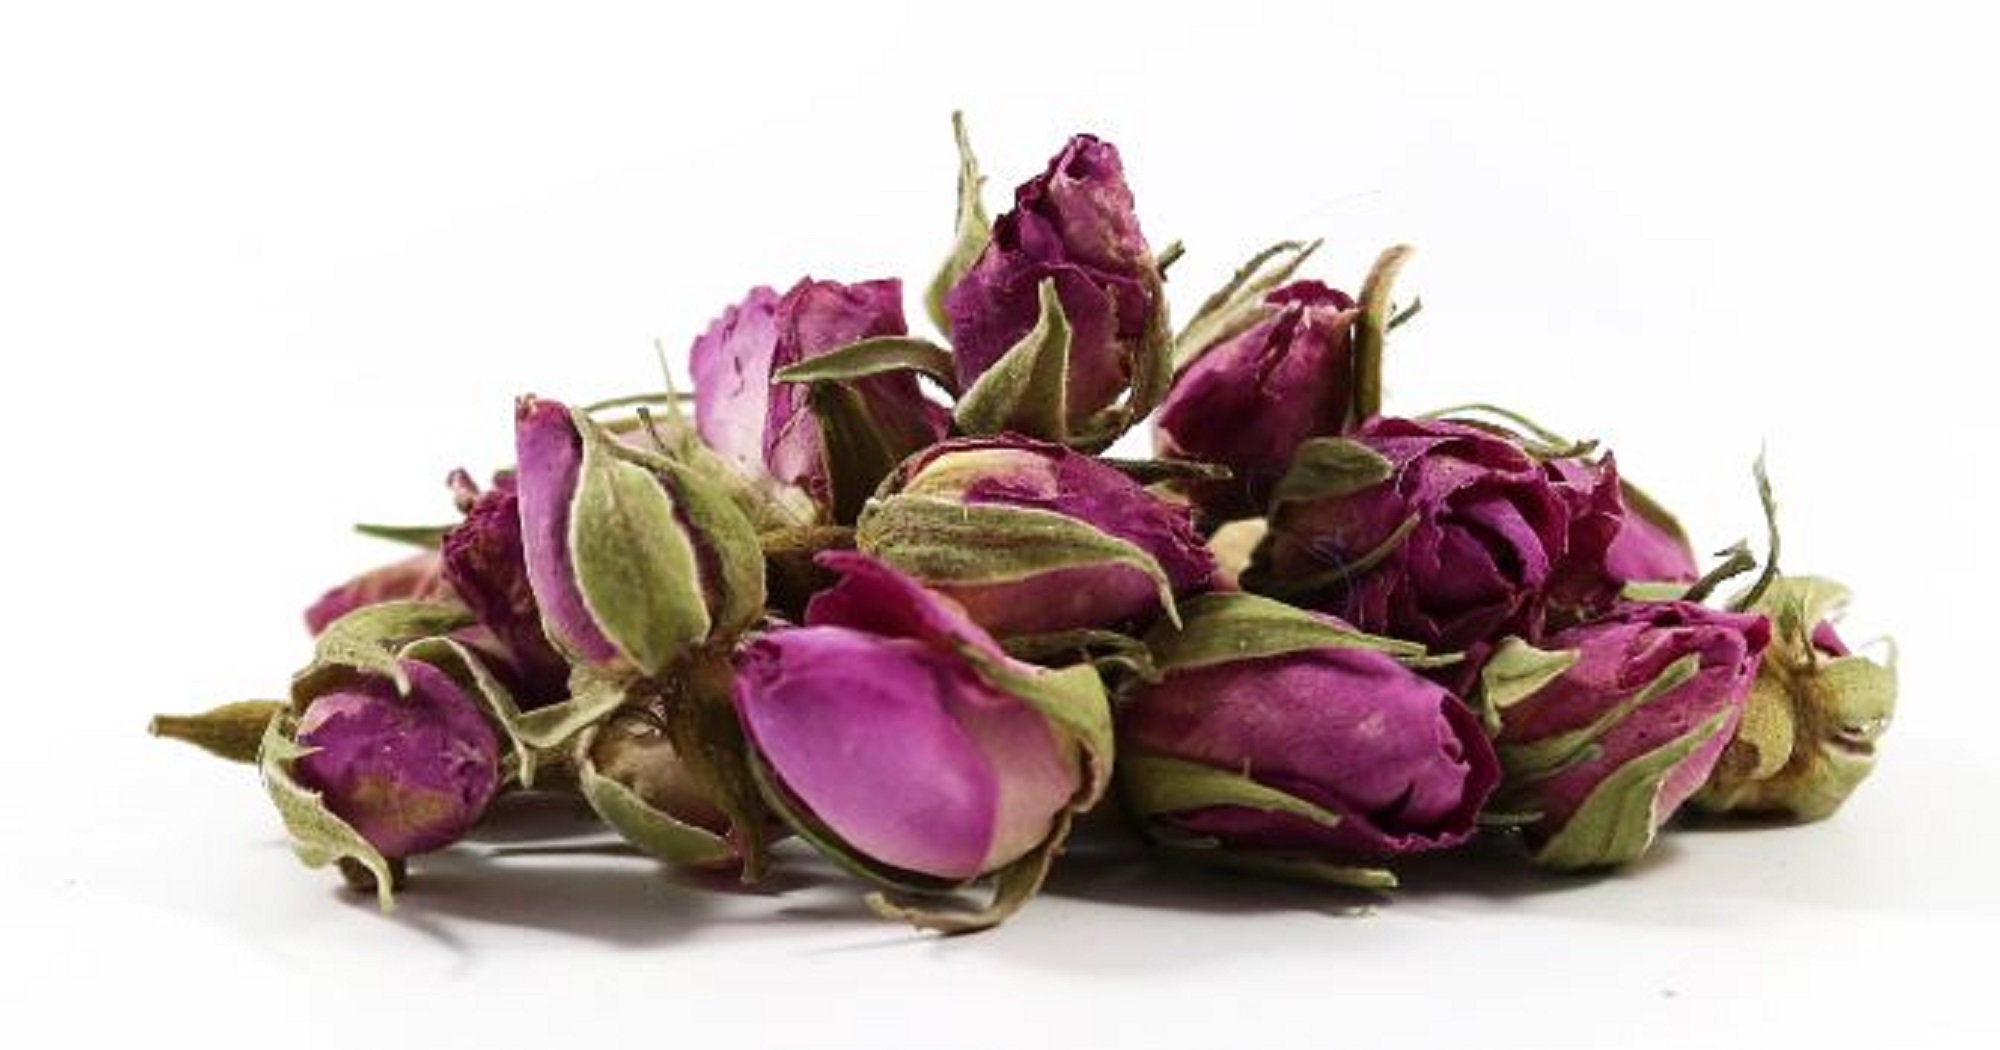 Prince Charles Bourbon Rose - Dried Rose Petals, Edible, Food Grade Red  Petals for Cooking and Tea